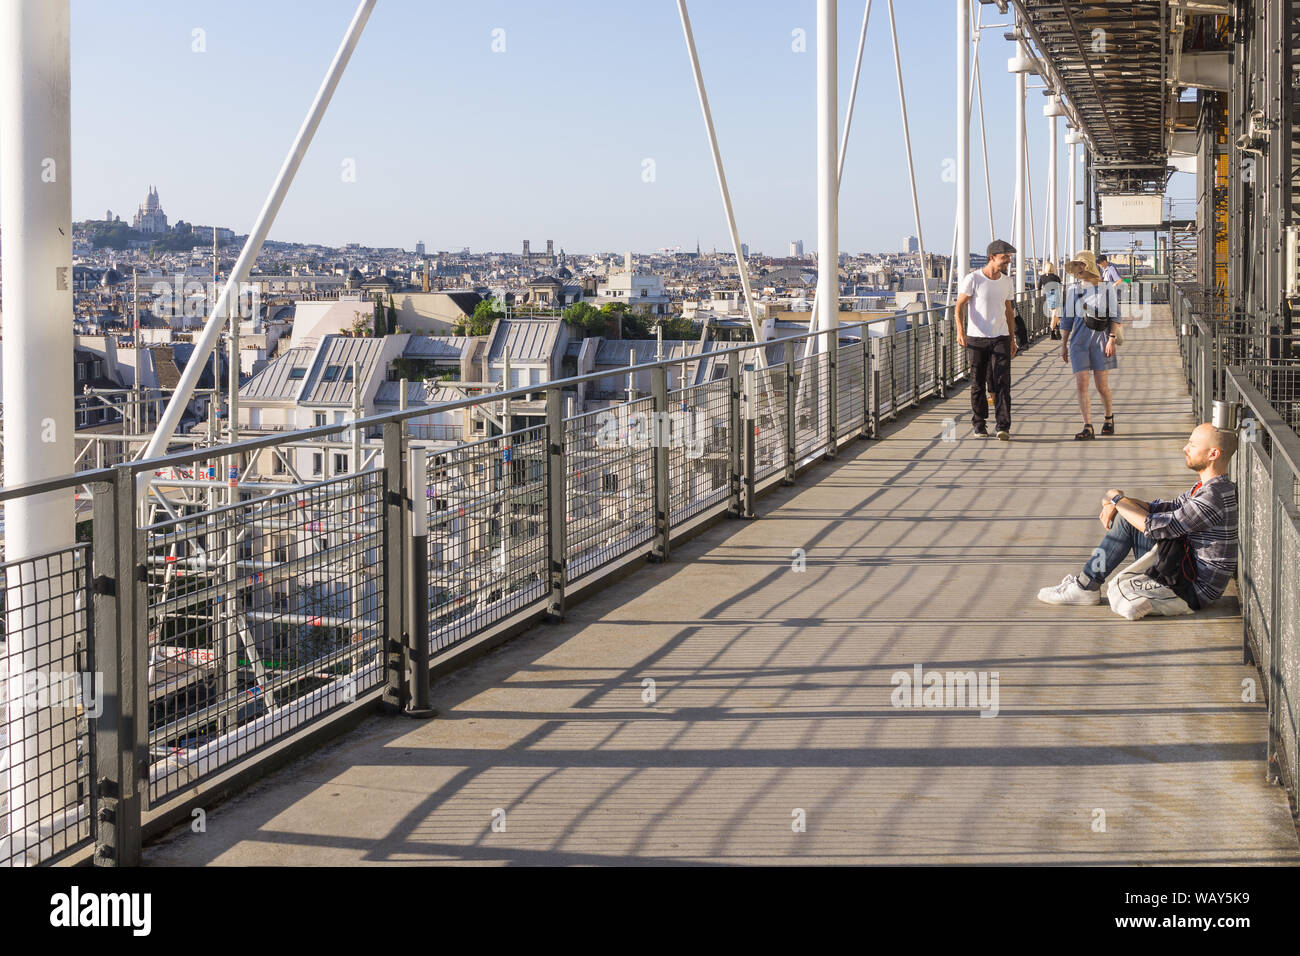 Paris Pompidou Centre - People enjoying afternoon sunshine on the platform of the Centre Pompidou with an aerial view of Paris. France, Europe. Stock Photo